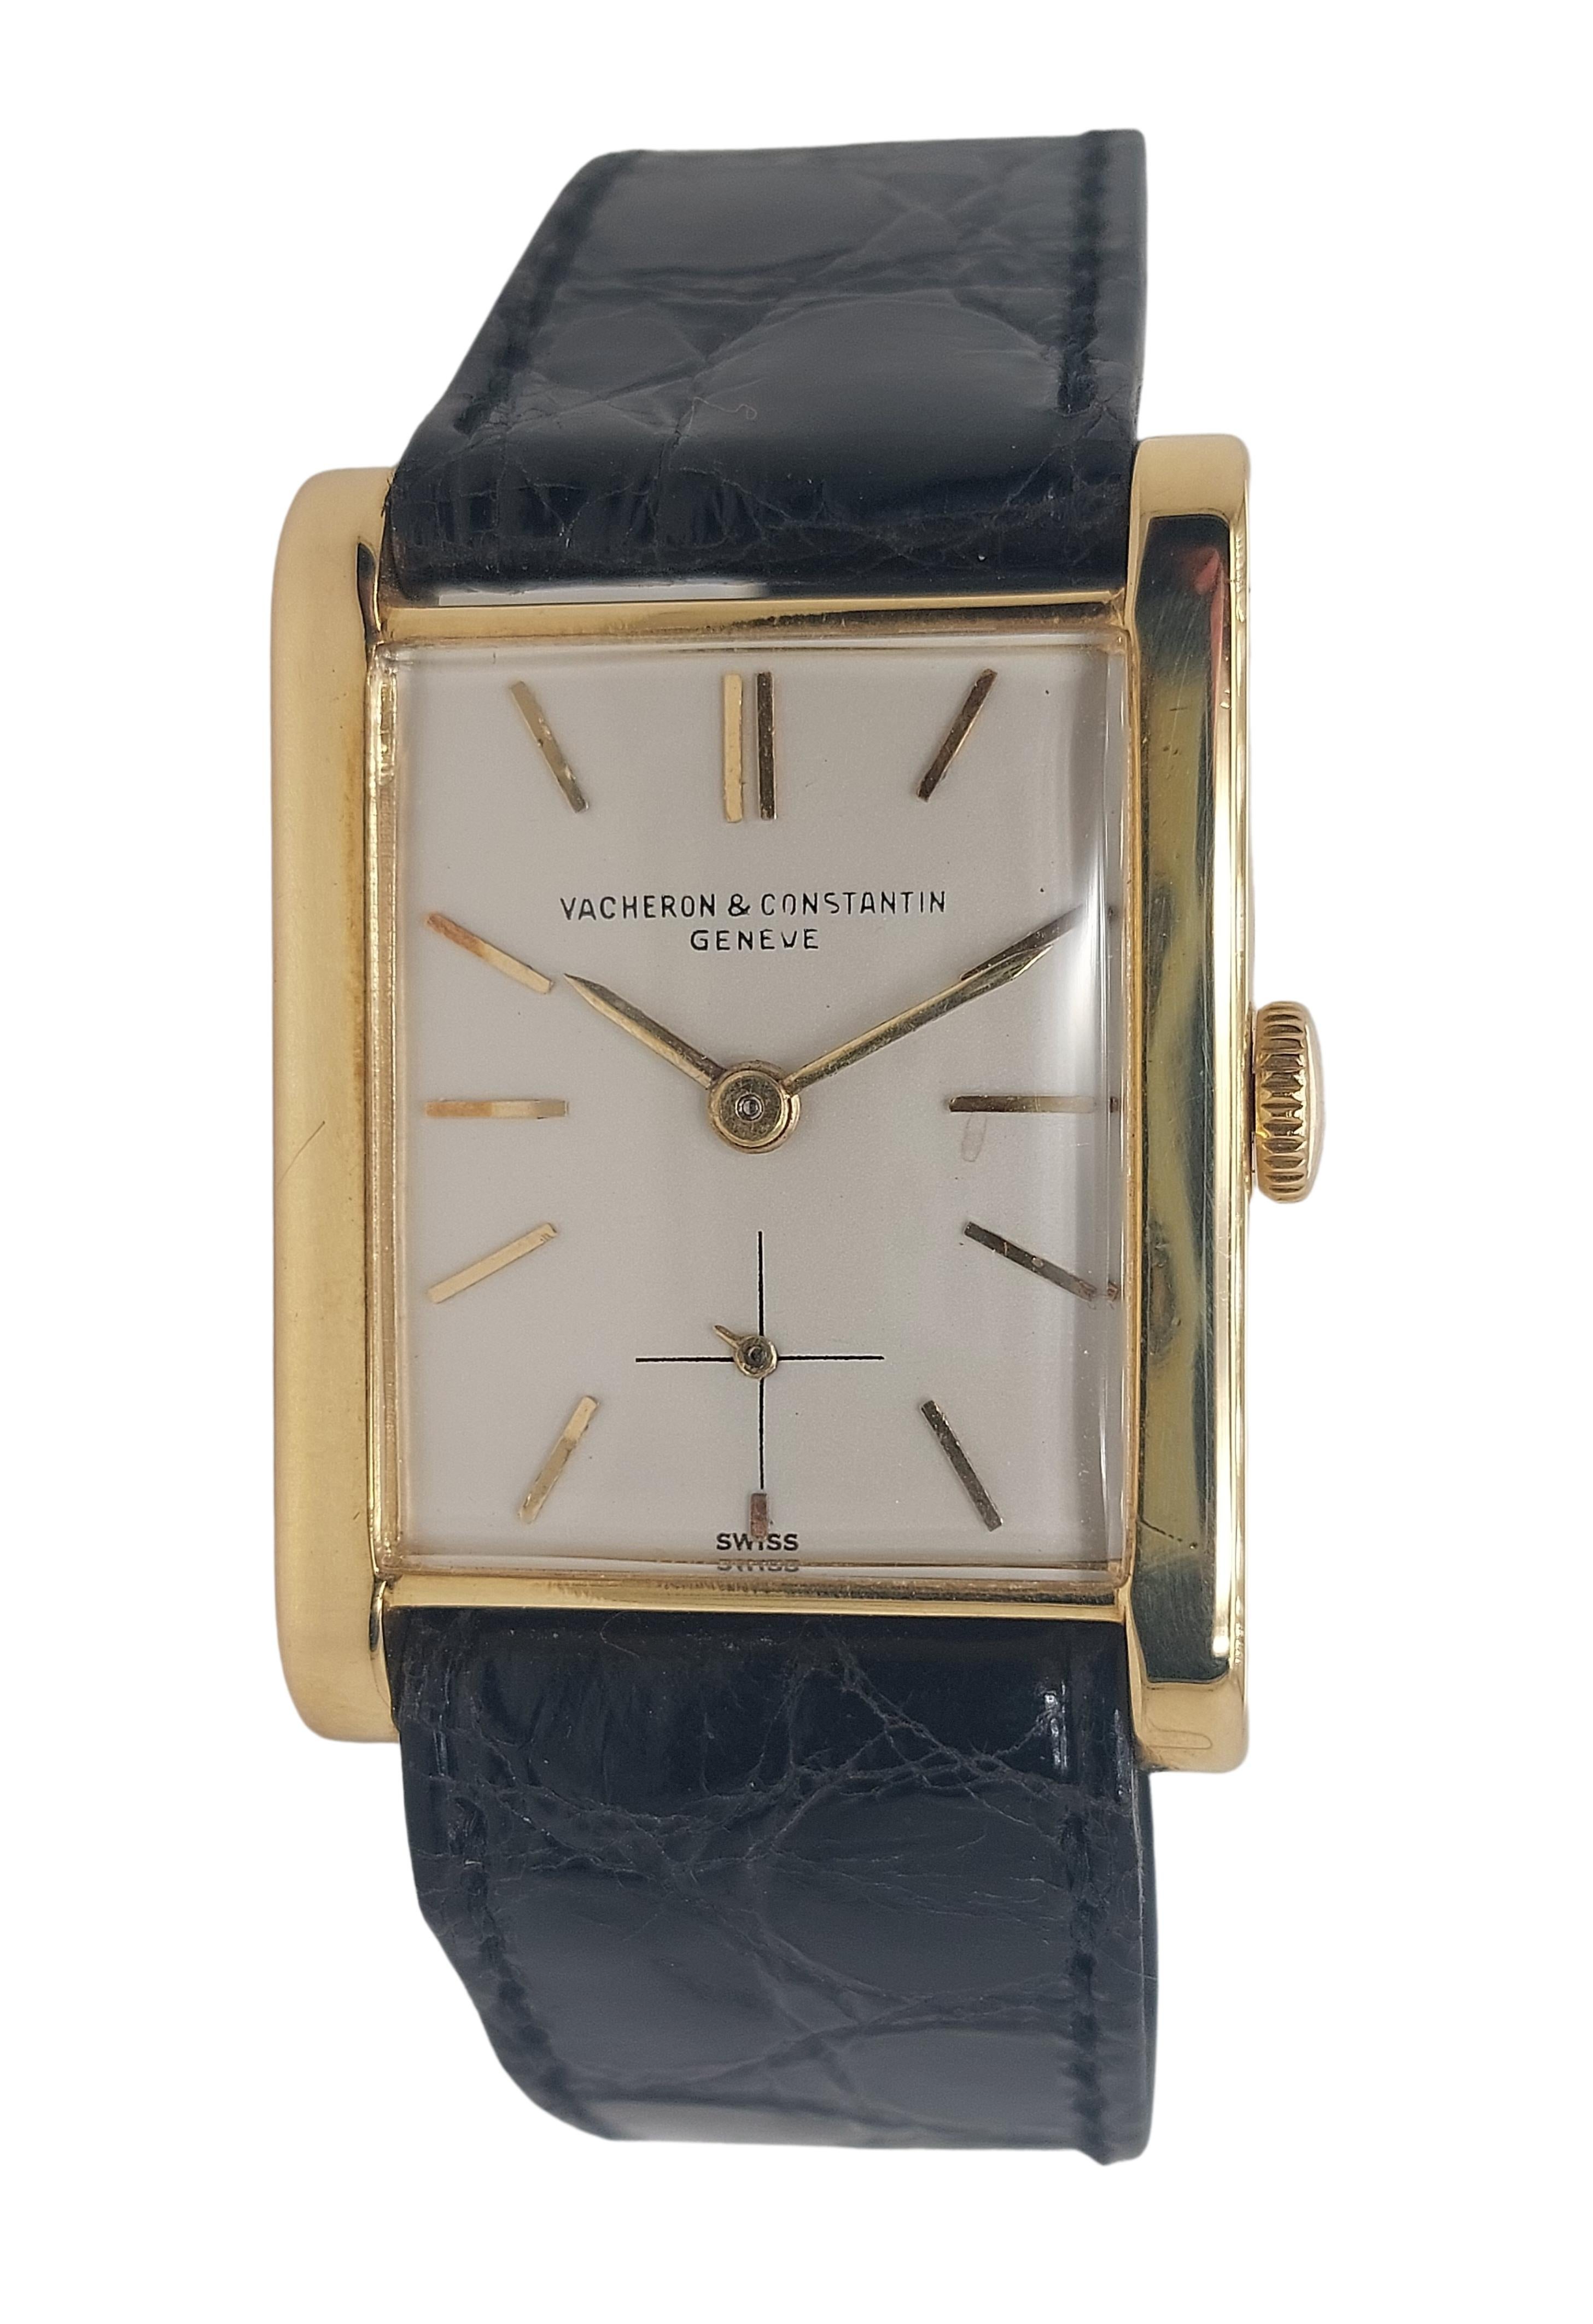 18kt Yellow Gold Vintage Square Vacheron Constantin, Mechanical Hand Winding in Excellent Condition!

Movement: mechanical with hand winding, Caliber 458 /3B

Functions: hours, minutes, subsidiary seconds

Case: 18kt yellow gold, diameter 23.50 mm x